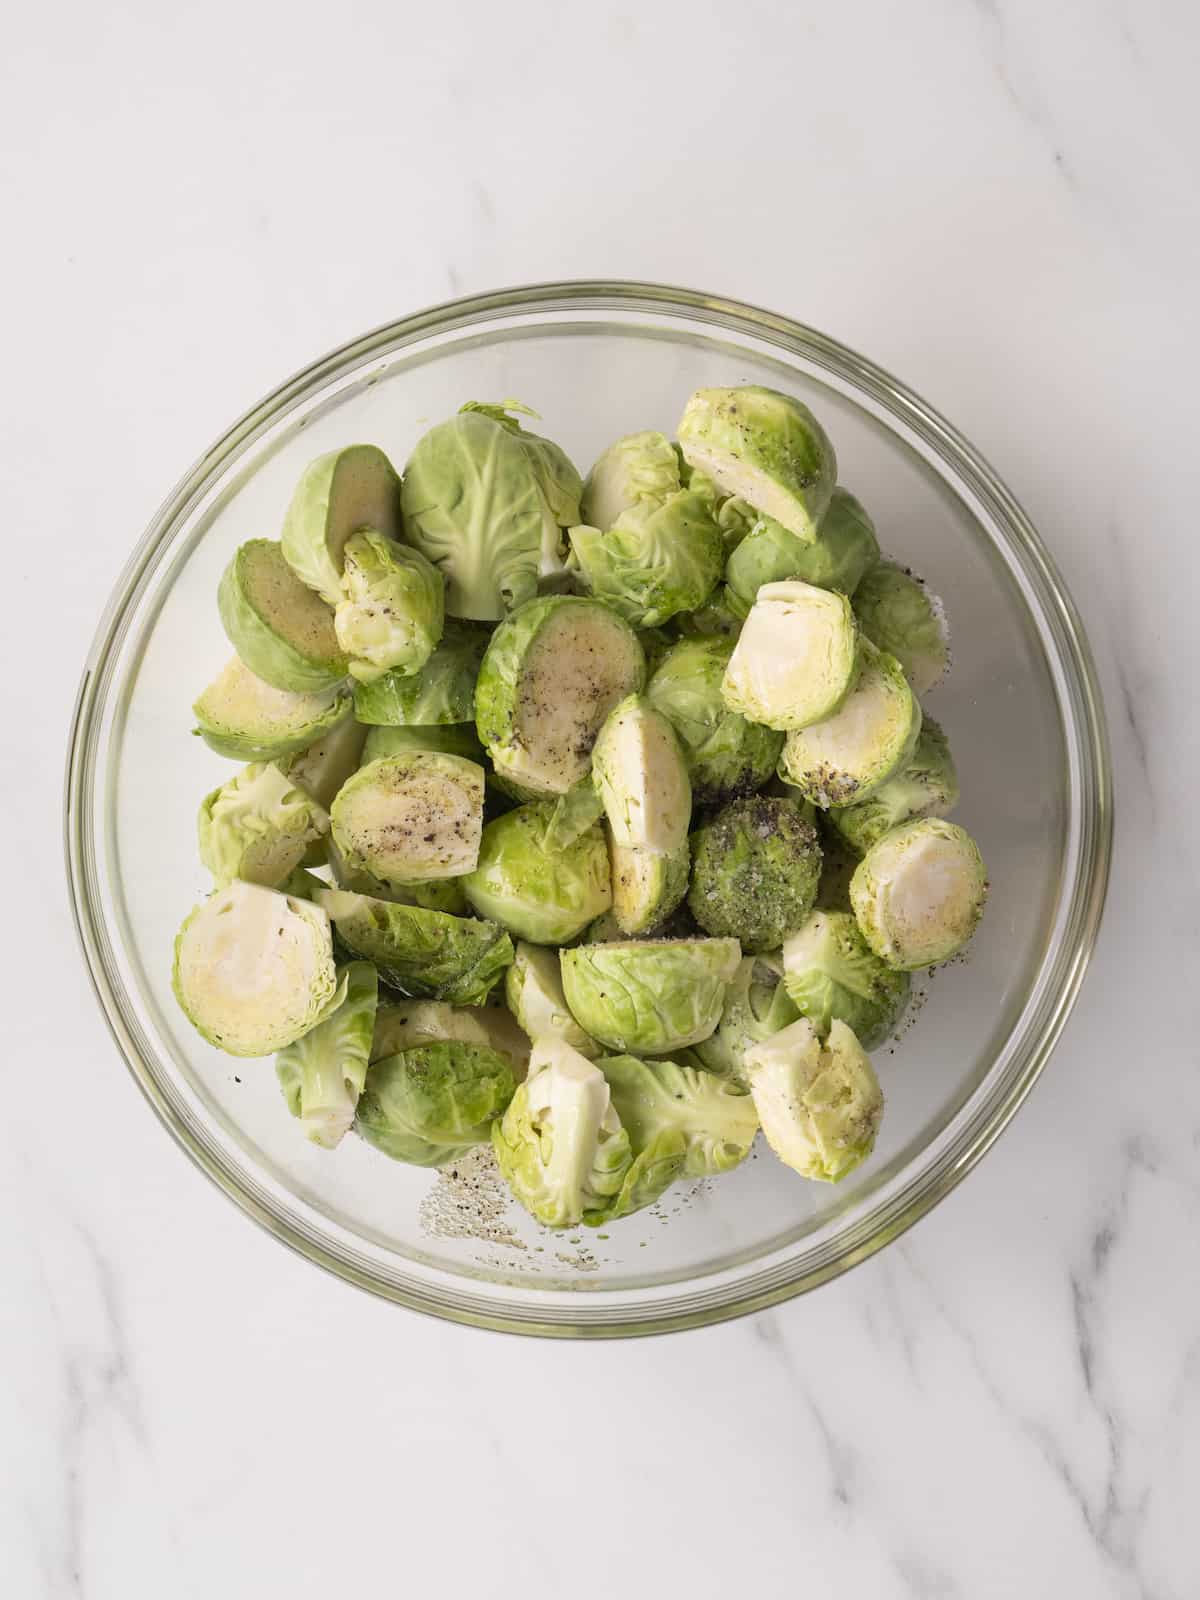 A small mixing bowl with trimmed and halved brussels sprouts.